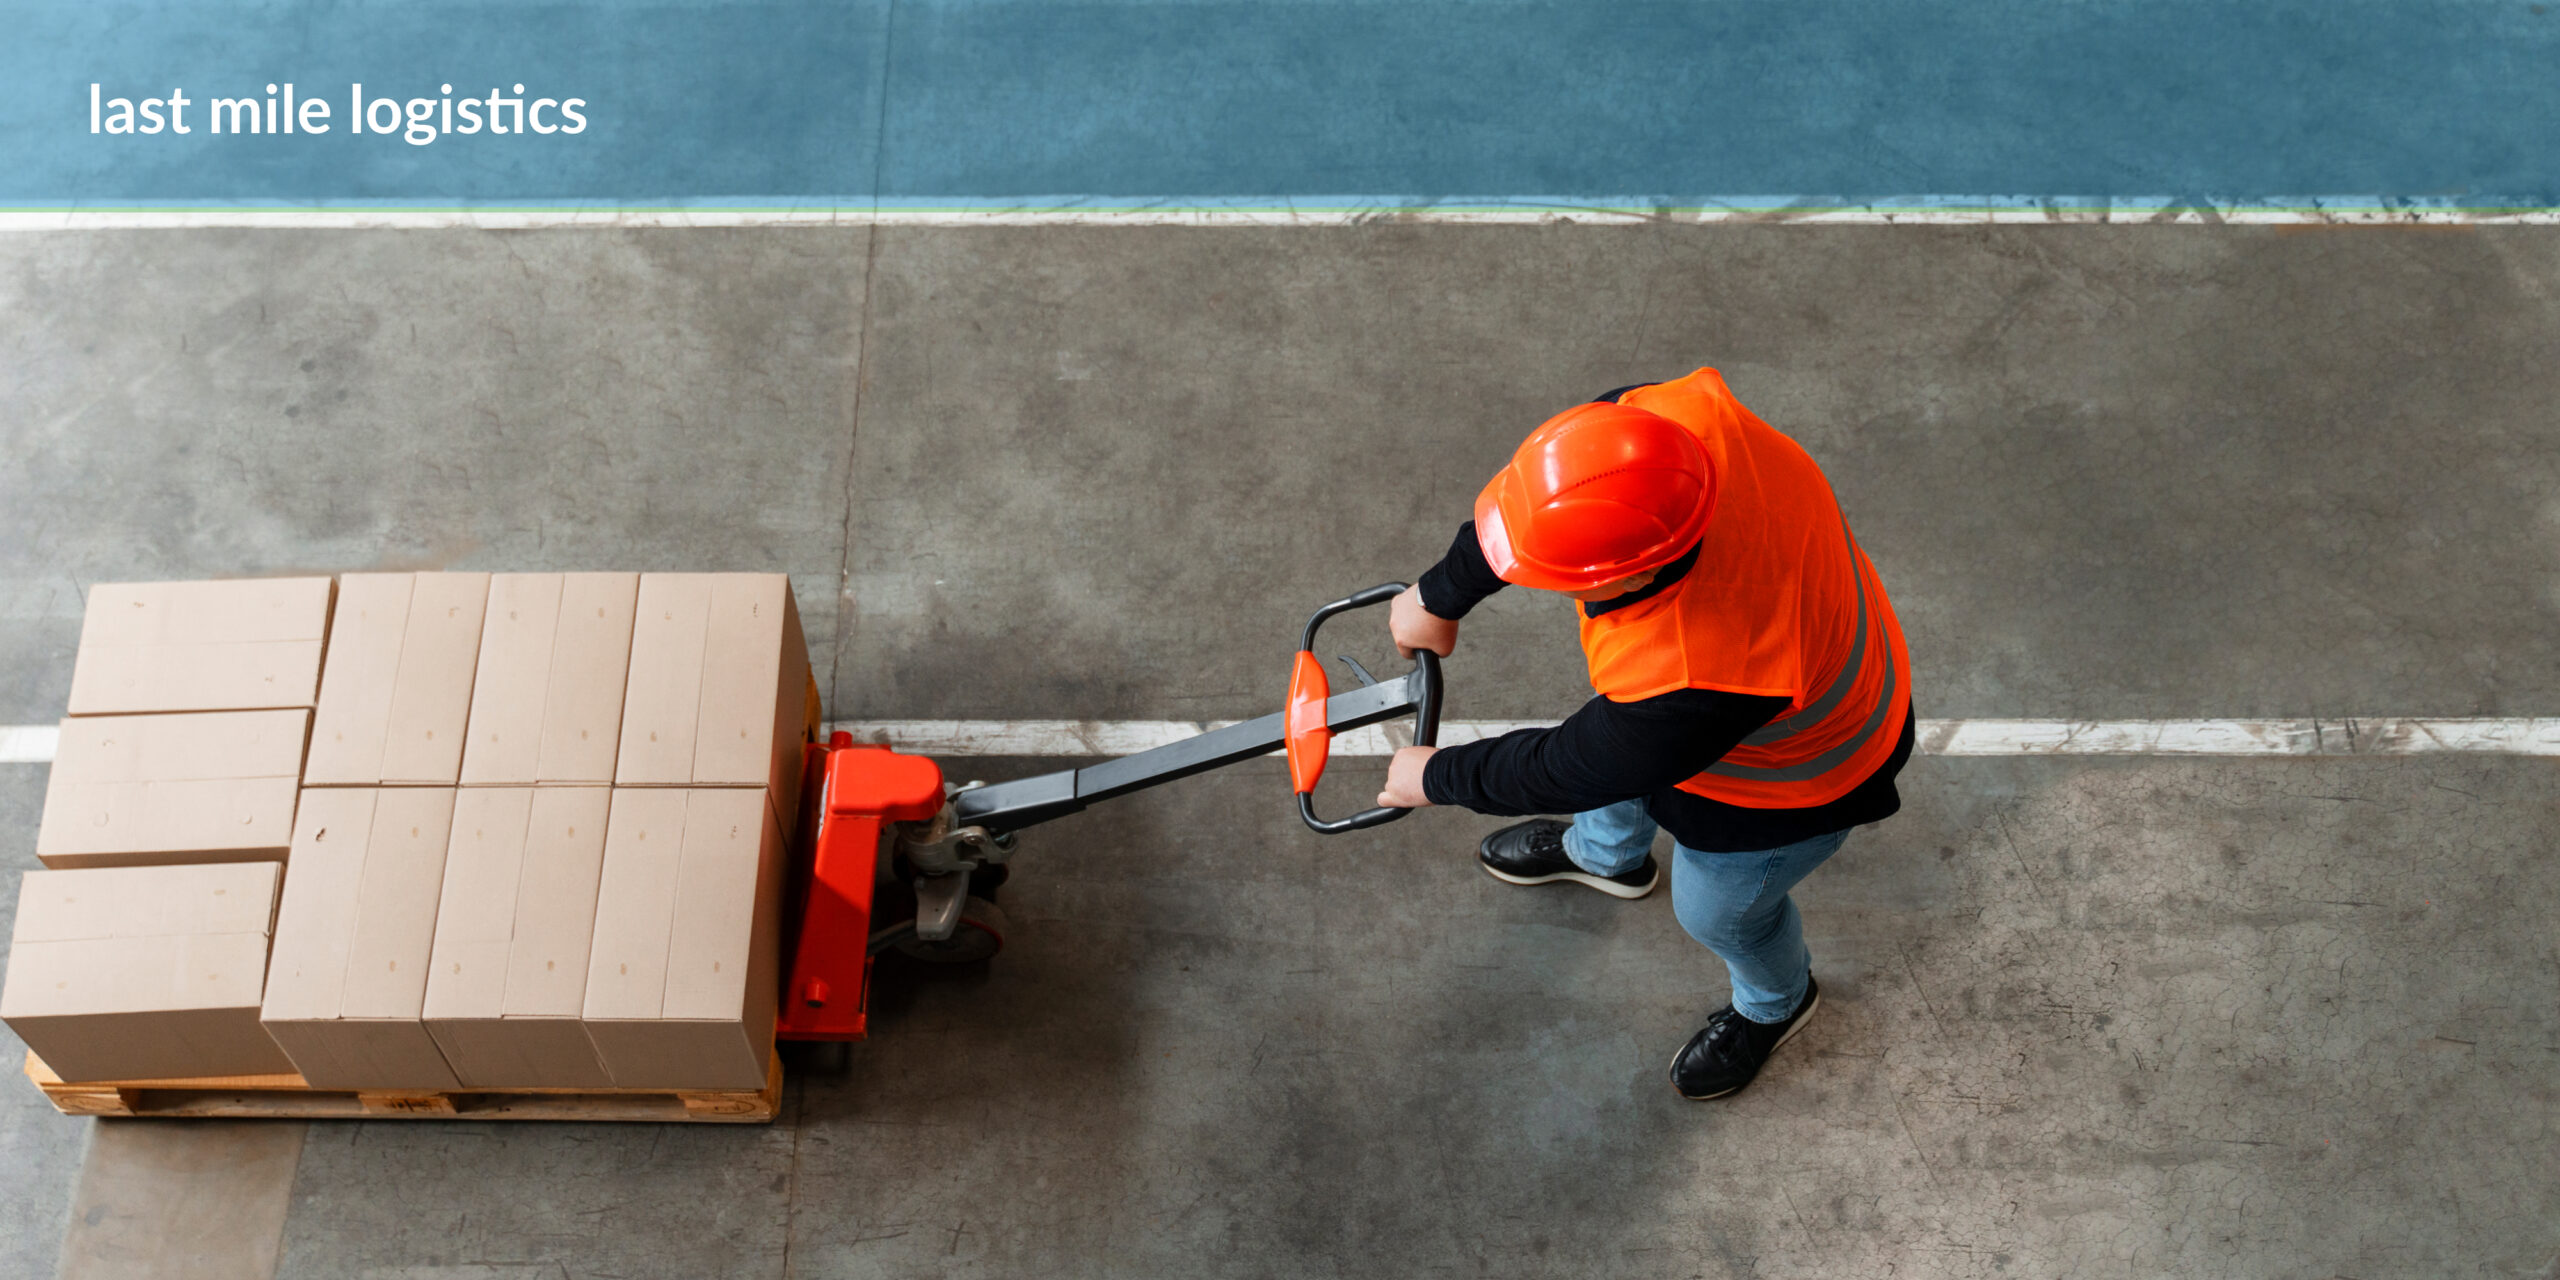 A worker in an orange safety vest and helmet using a manual pallet jack to move a stack of cardboard boxes on a wooden pallet, with the text "last mile logistics" above.